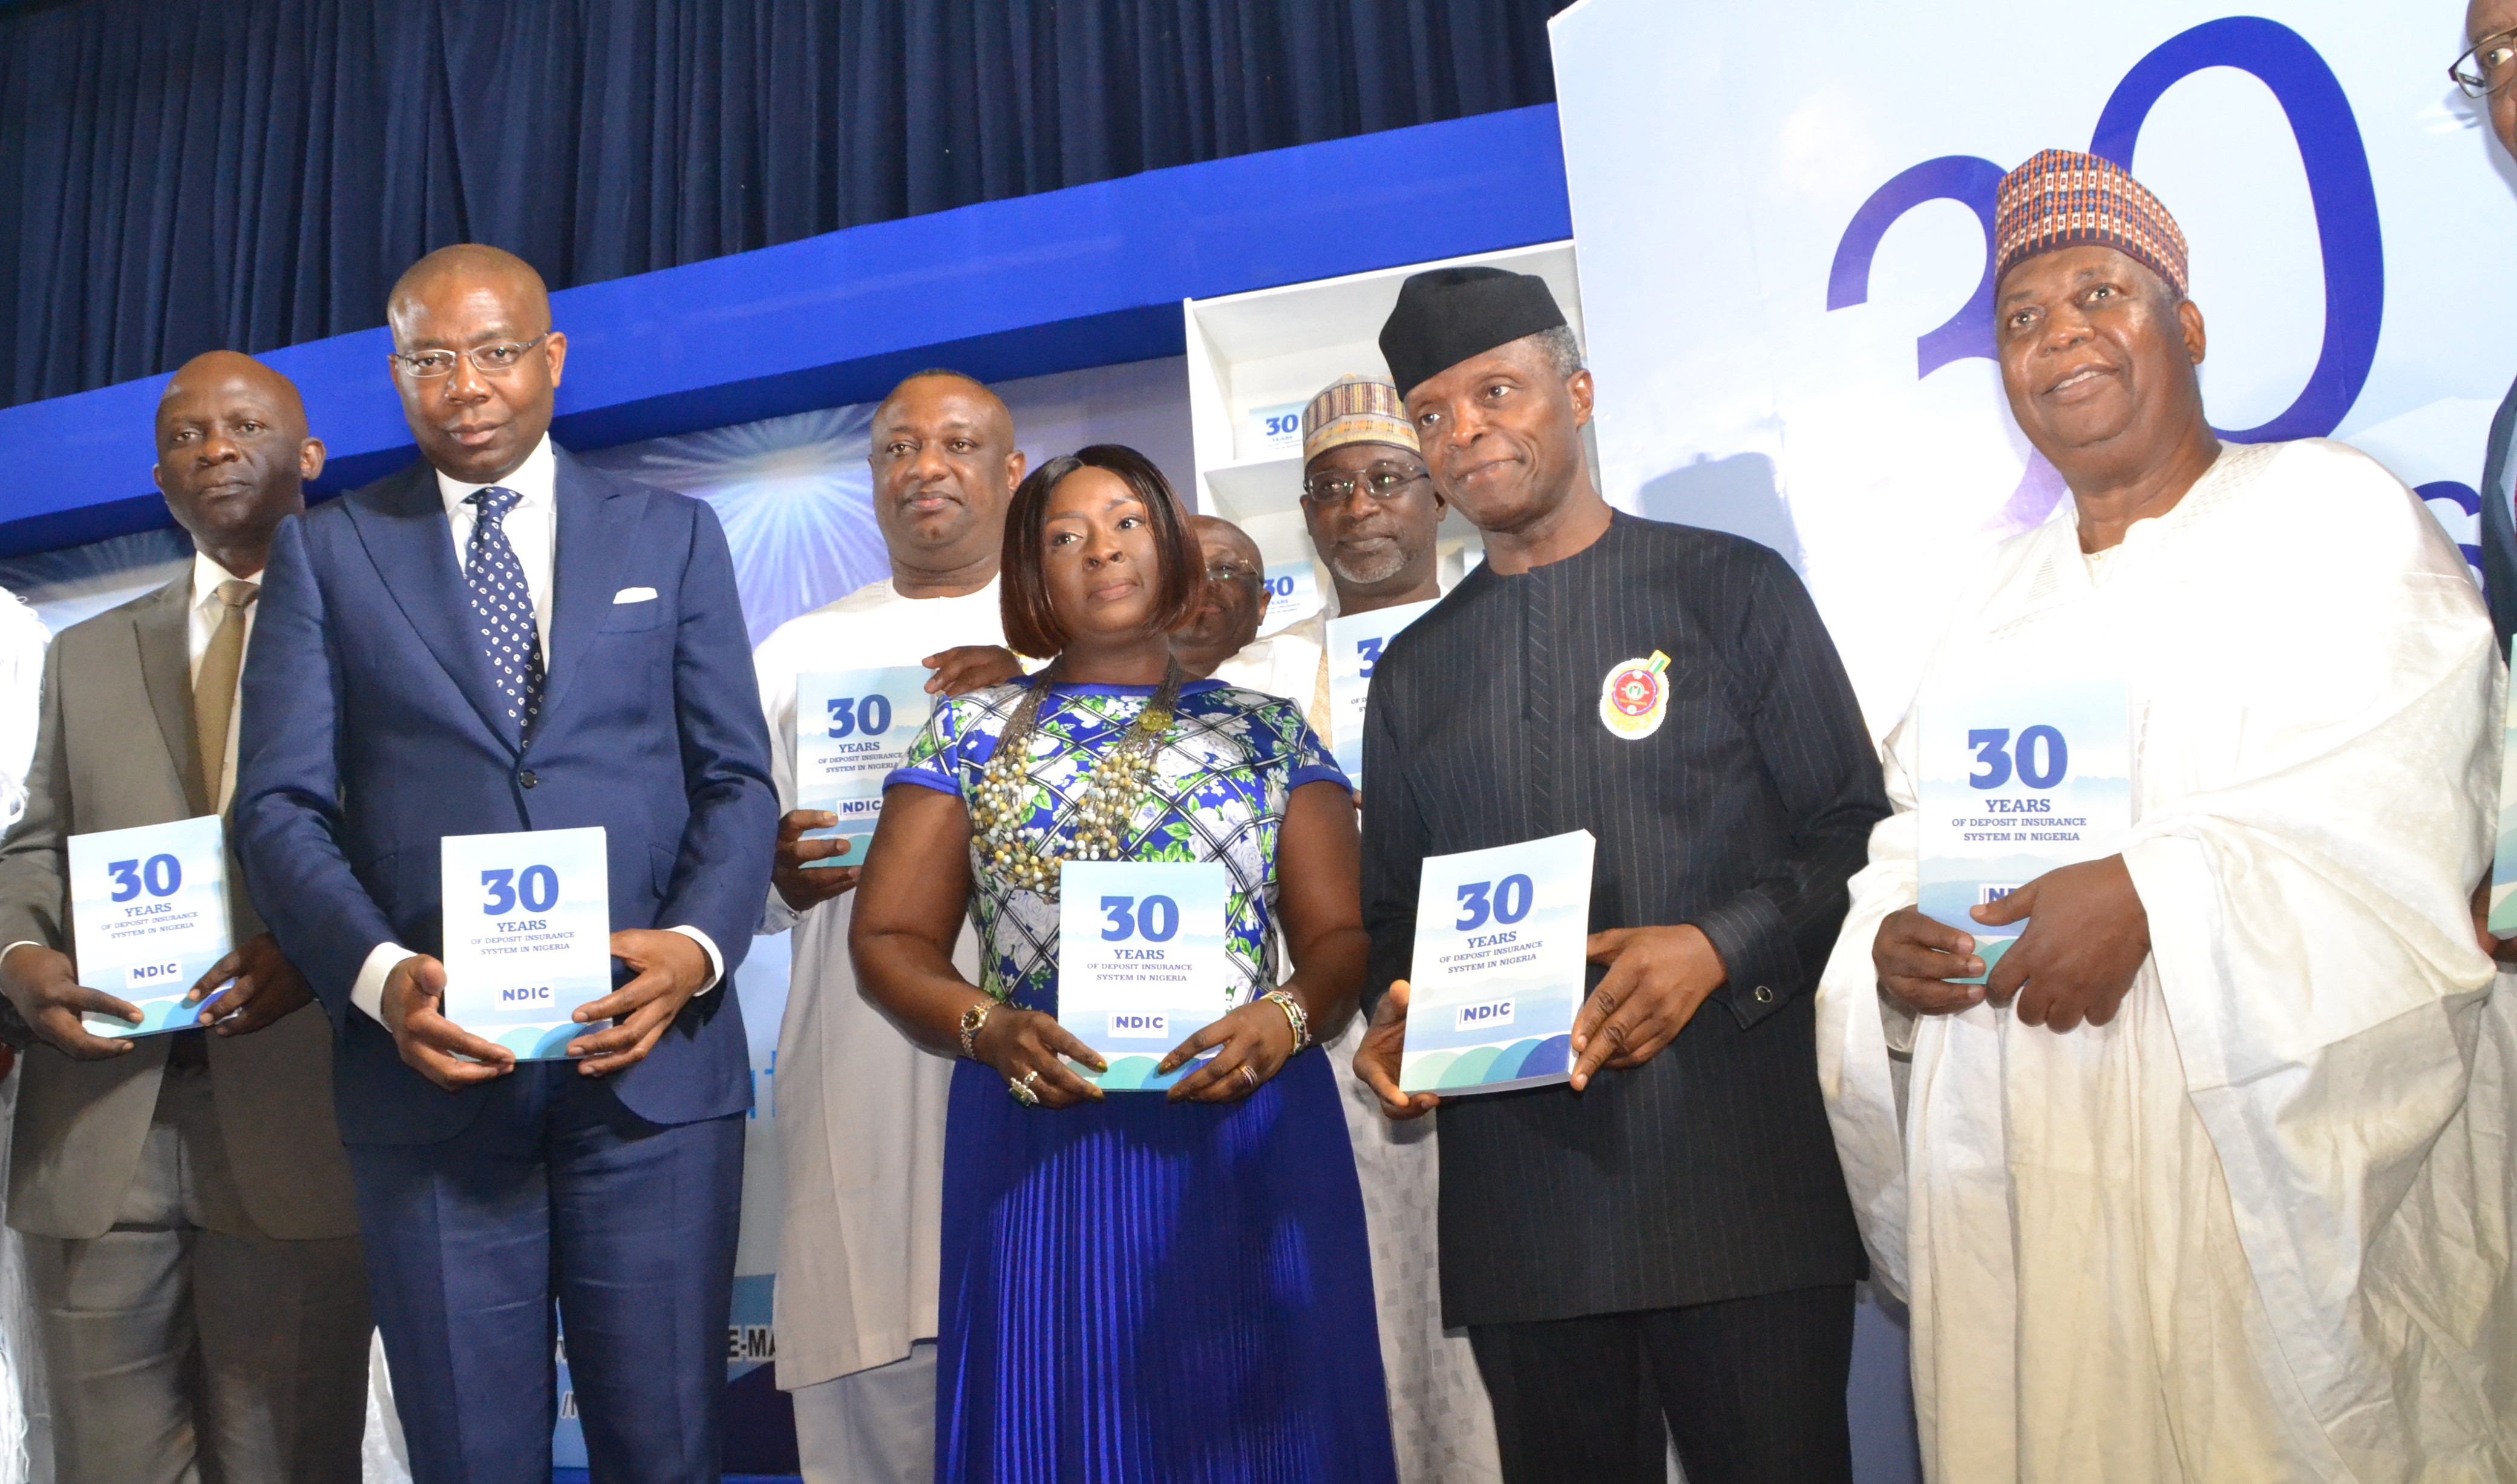 L-R: Rep. of the Rt. Hon Speaker, House of Representatives Hon. Victor Nwokolo; Guest Lecturer, Aigboje Aig-Imoukhuede; Minister of State for Niger Delta Affairs, Festus Keyamo, SAN; NDIC Board Chairman, Ronke Sokefun; Minister of Water Resources, Engr. Suleiman H. Adamu; Vice President, Prof. Yemi Osibanjo, and NDIC MD/CE Umaru Ibrahim, mni, FCIB, at the Nigeria Deposit Insurance Corporation (NDIC) 30th Anniversary Lecture and Presentation of the Book: 30 Years of Deposit Insurance System in Nigeria yesterday in Abuja 